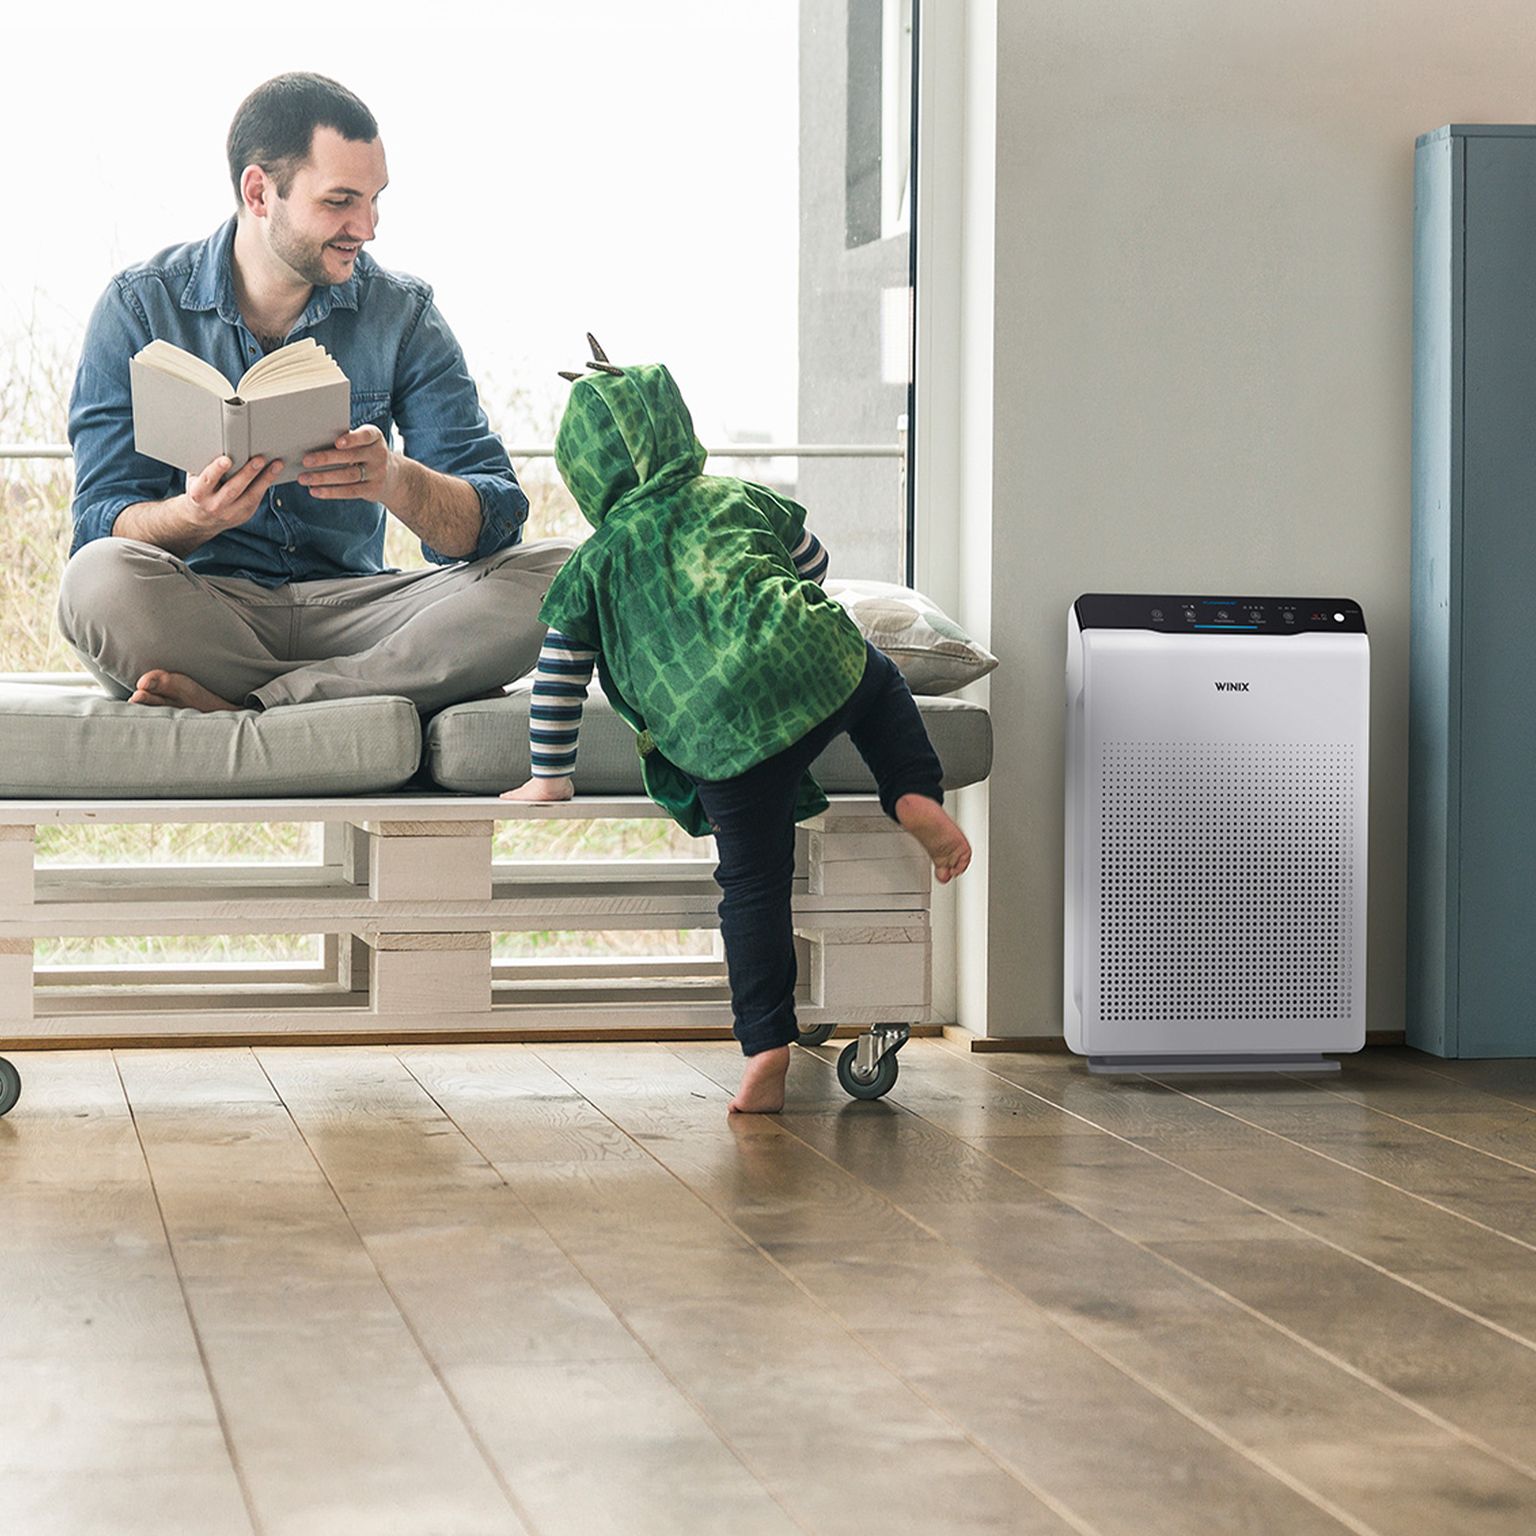 Winix C535 True HEPA 4-Stage Air Purifier for allergens and VOCs with 2 Years of Filters and PlasmaWave Technology AHAM Verified for 360 sq ft and Max Room Capacity 1728 sq ft. - image 9 of 9